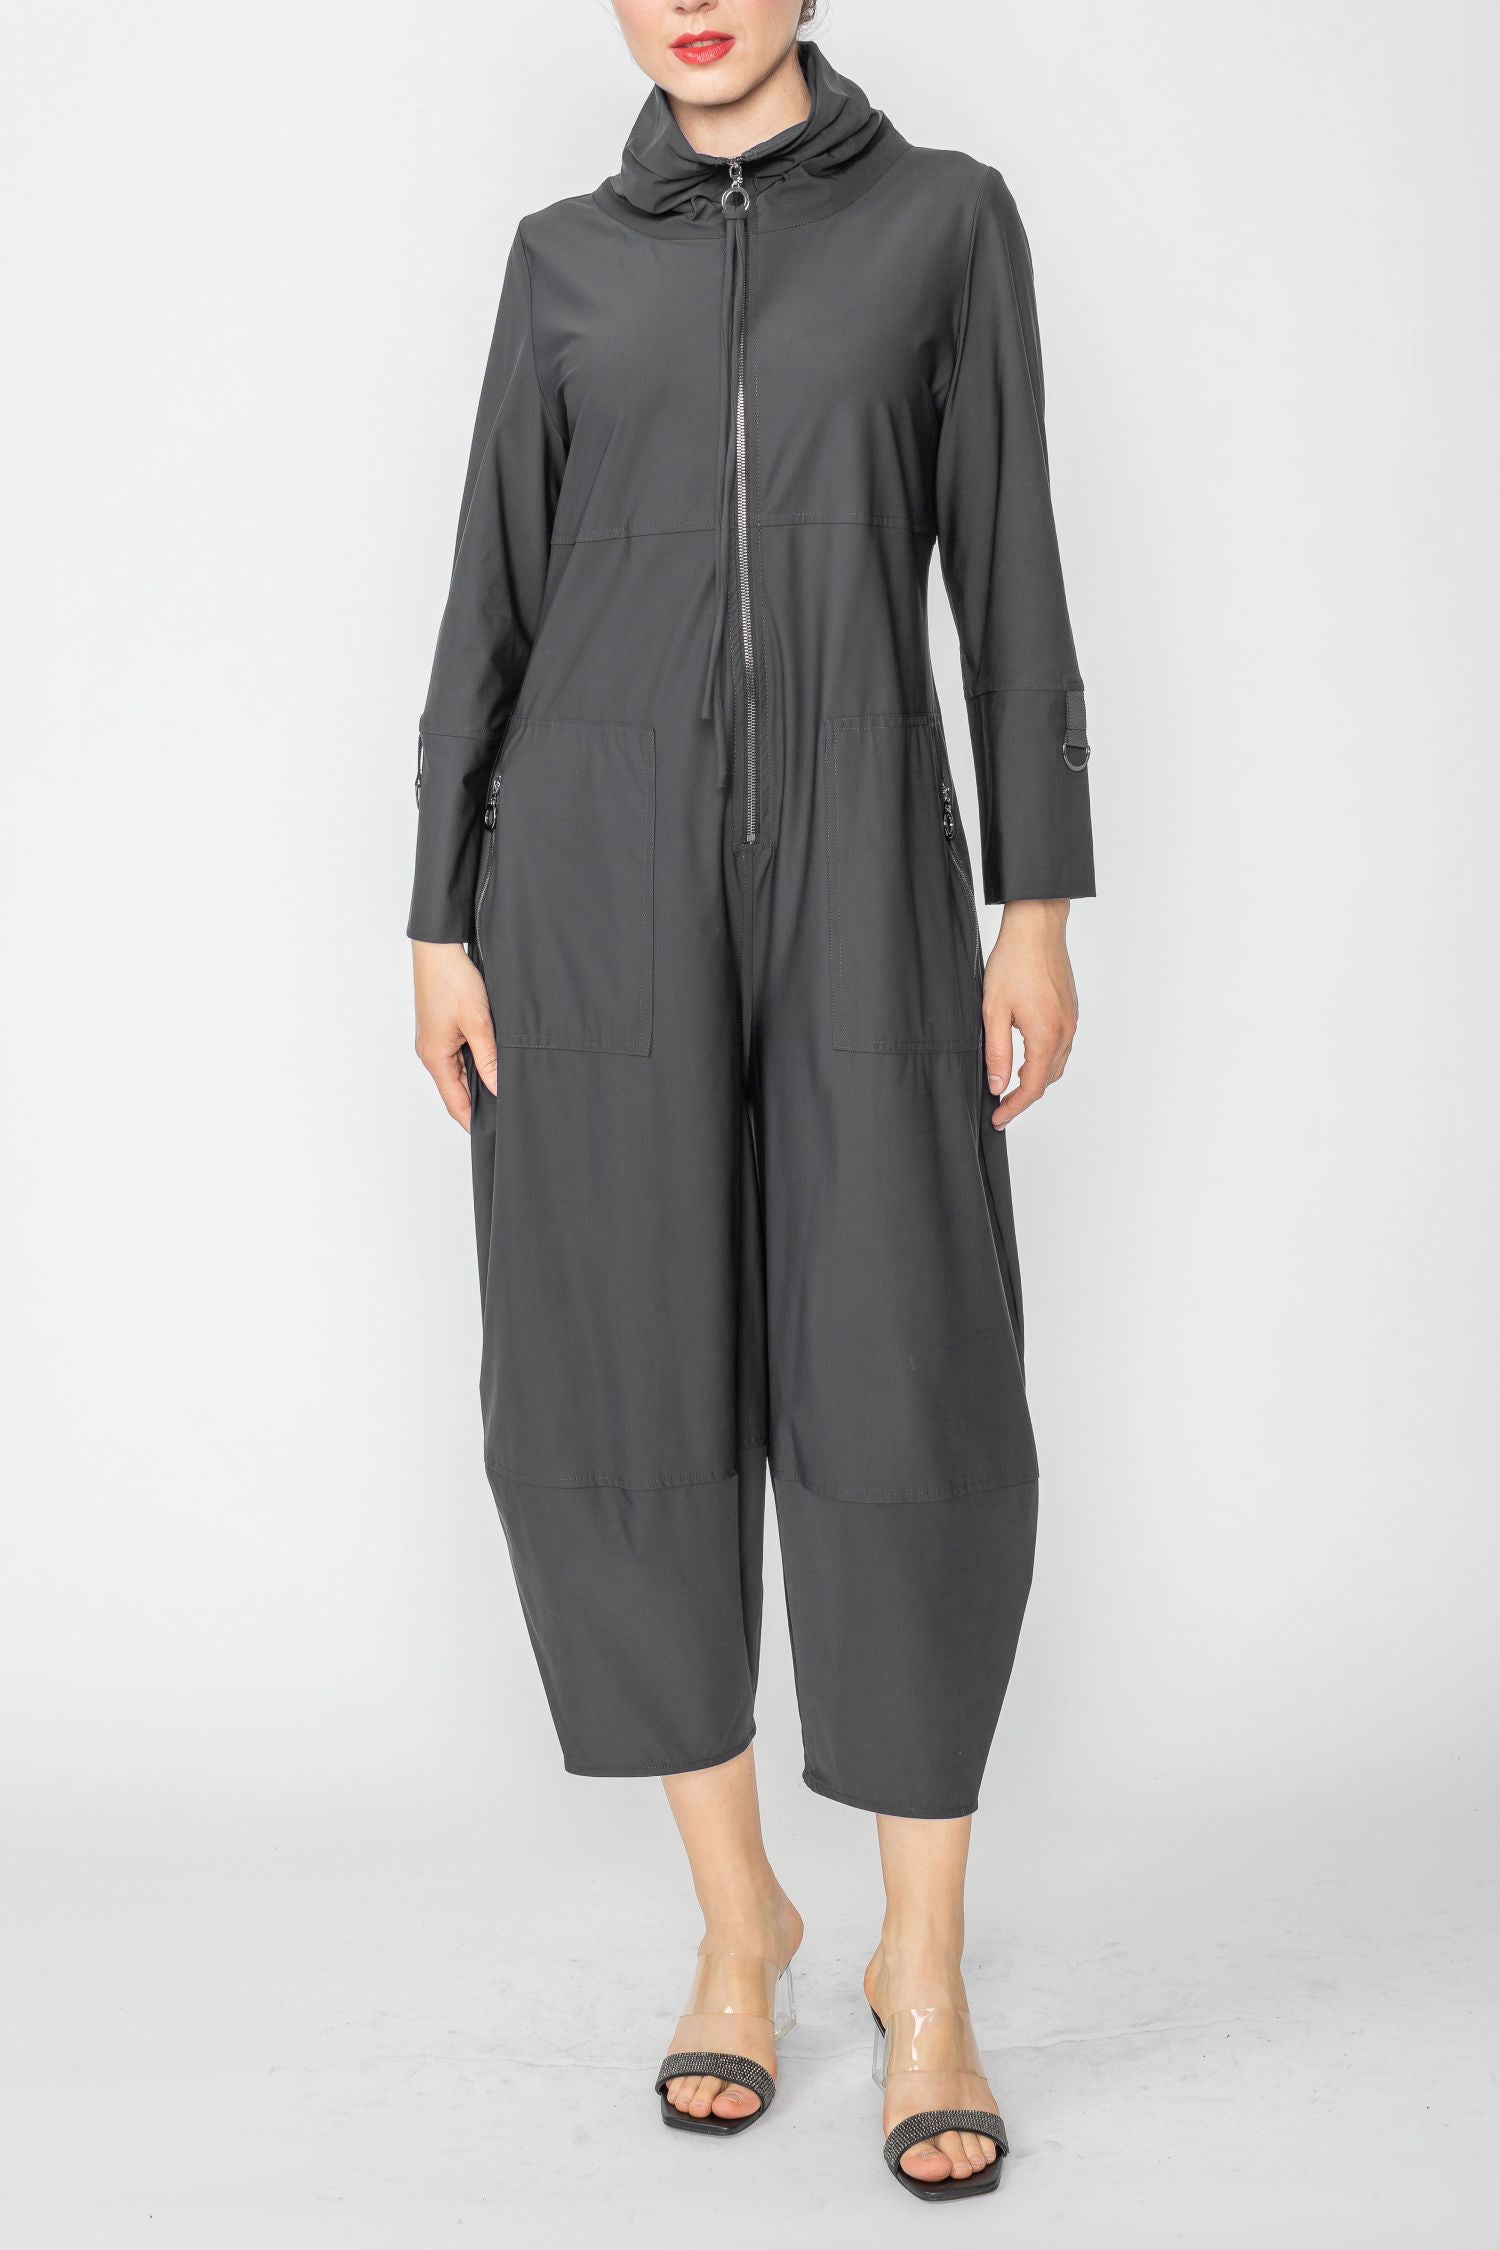 Charcoal Zip-Up Front Cropped Long Sleeve Jumpsuit